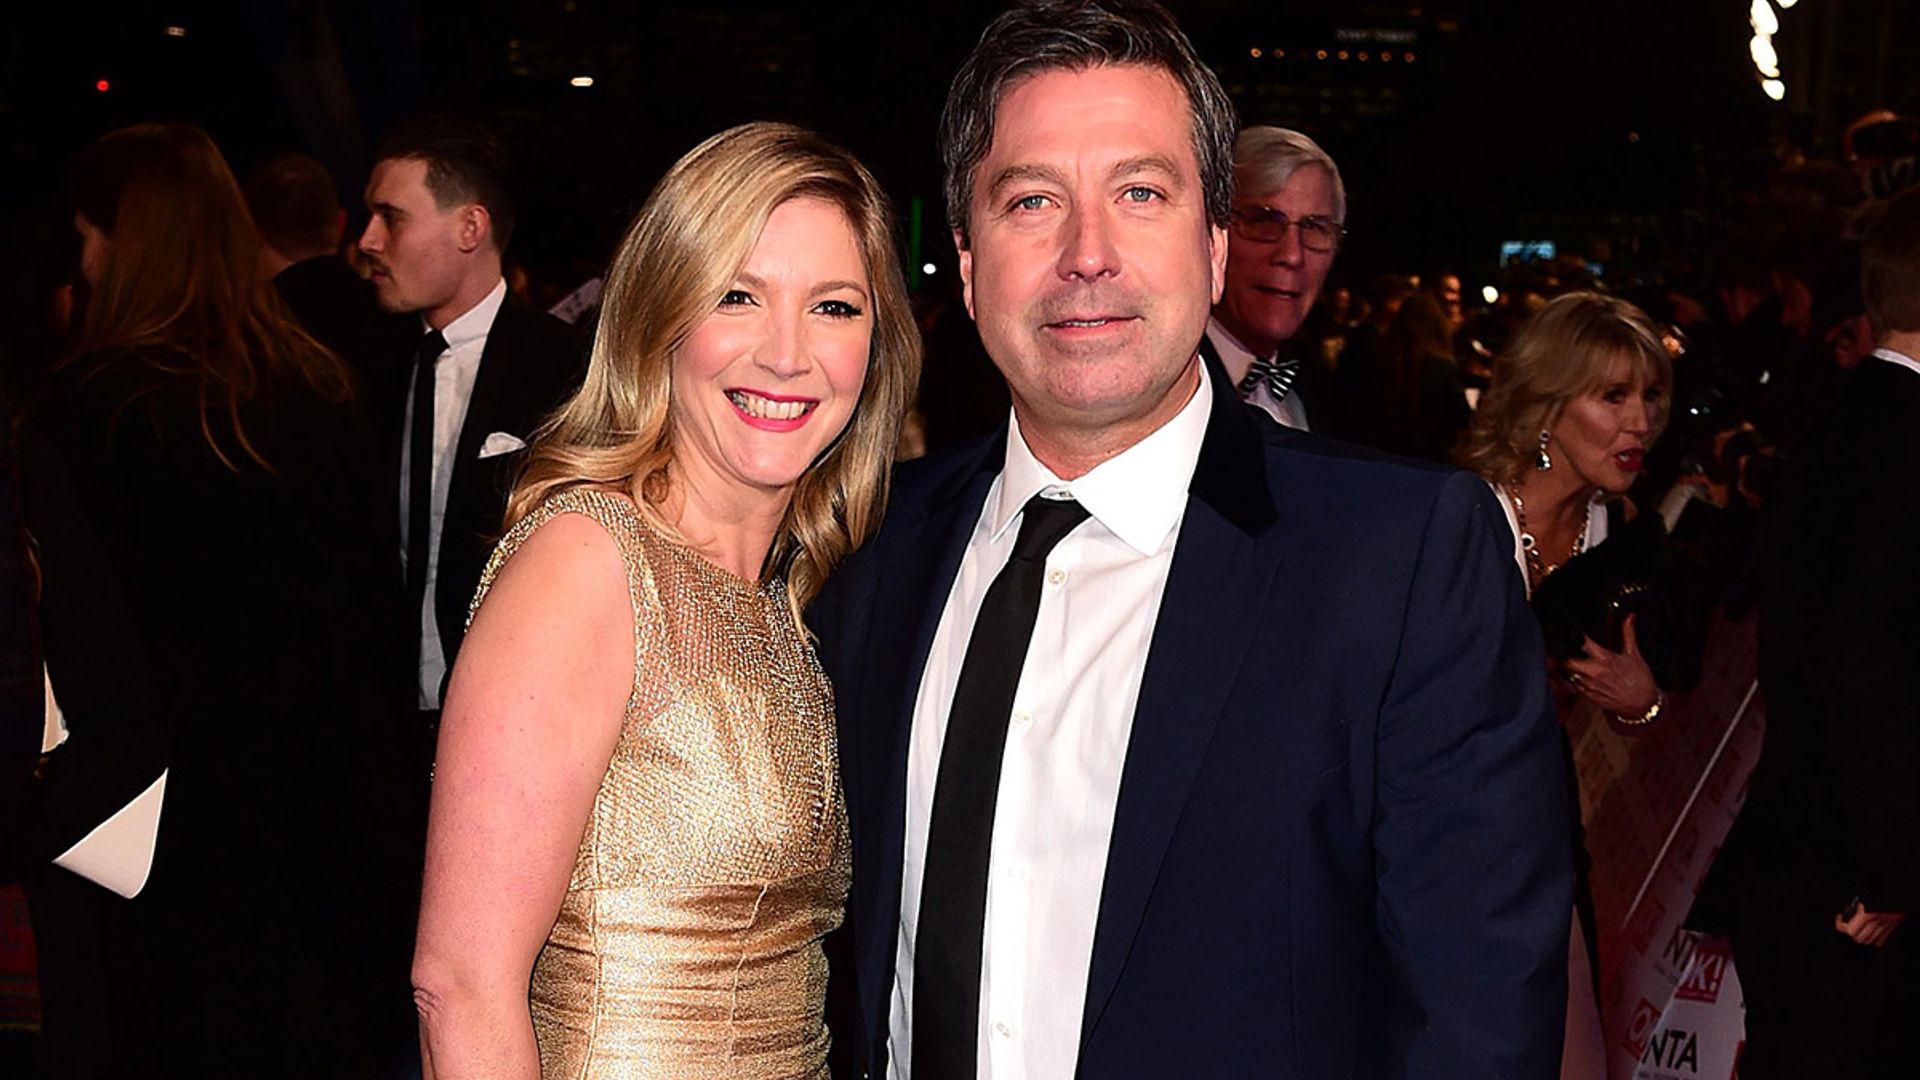 MasterChef's John Torode opens up about date nights with Lisa Faulkner